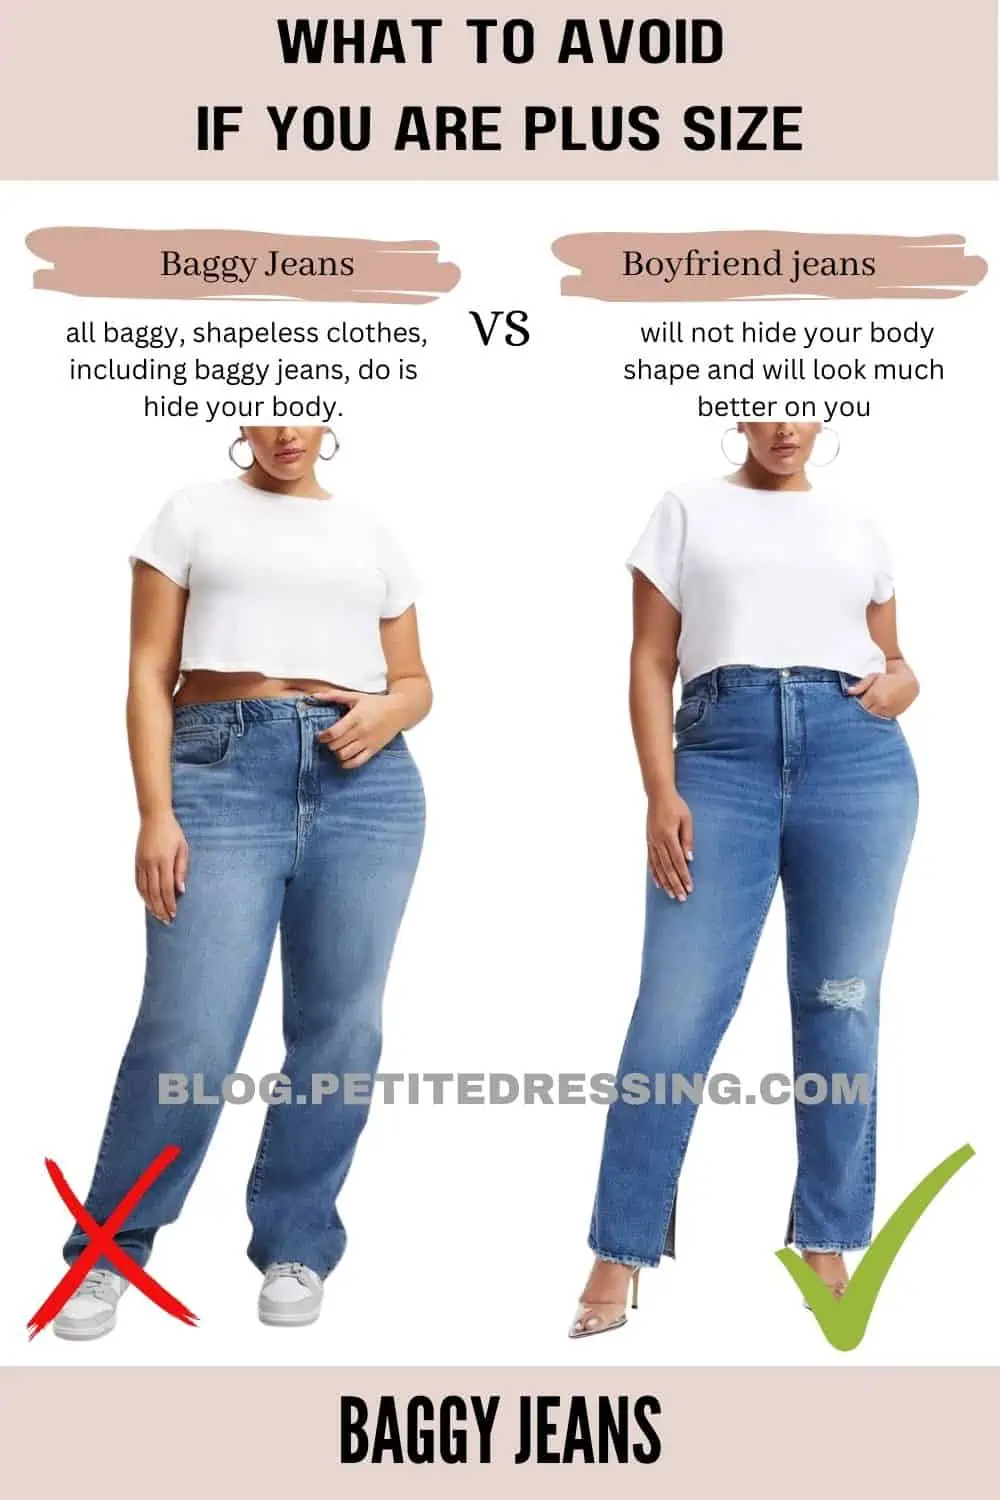 HOW TO: style baggy jeans 🫶🏼 plus size edition